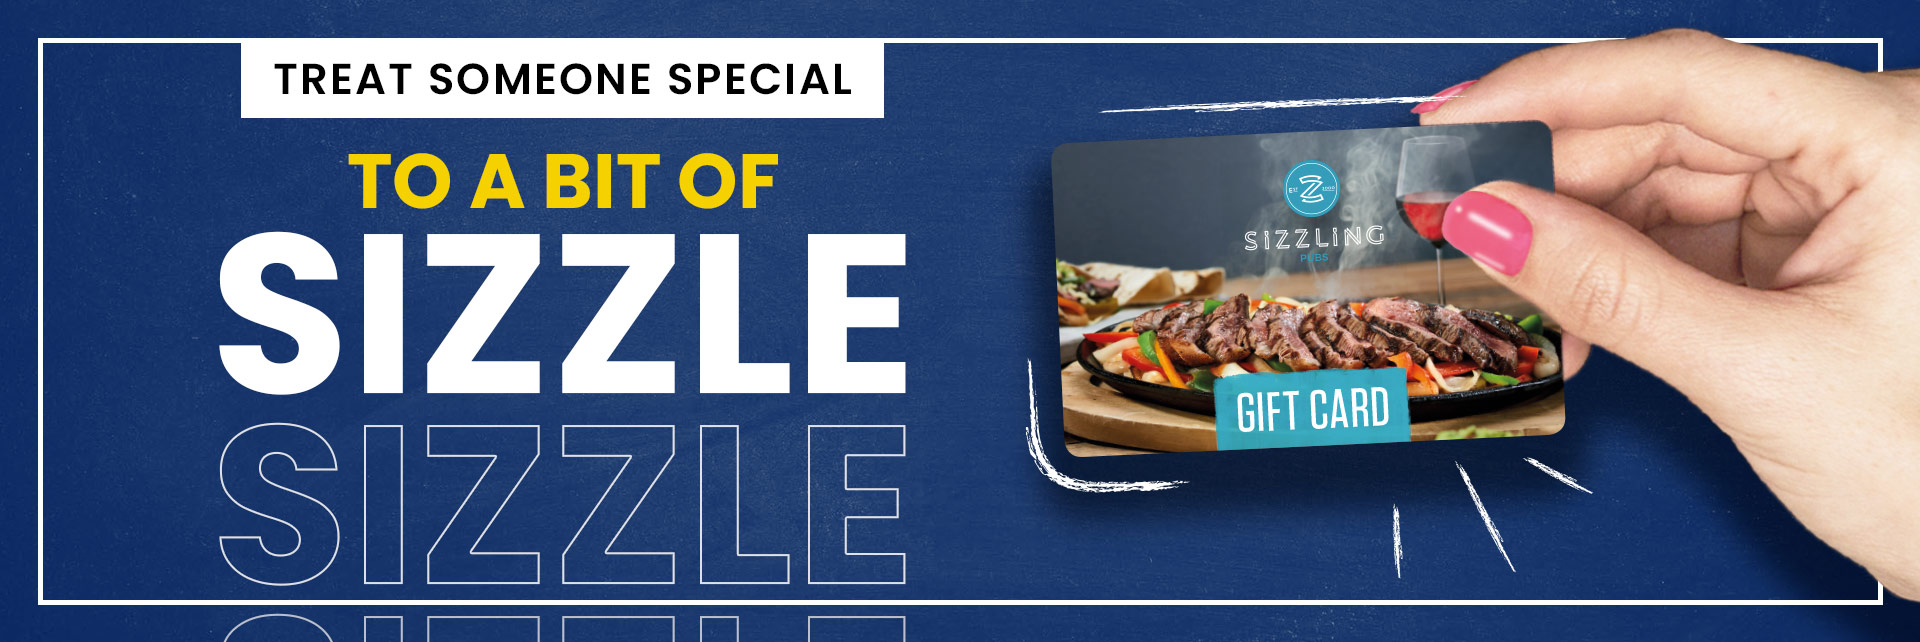 Sizzling Pubs Gift Card at The Journey's End in Birmingham